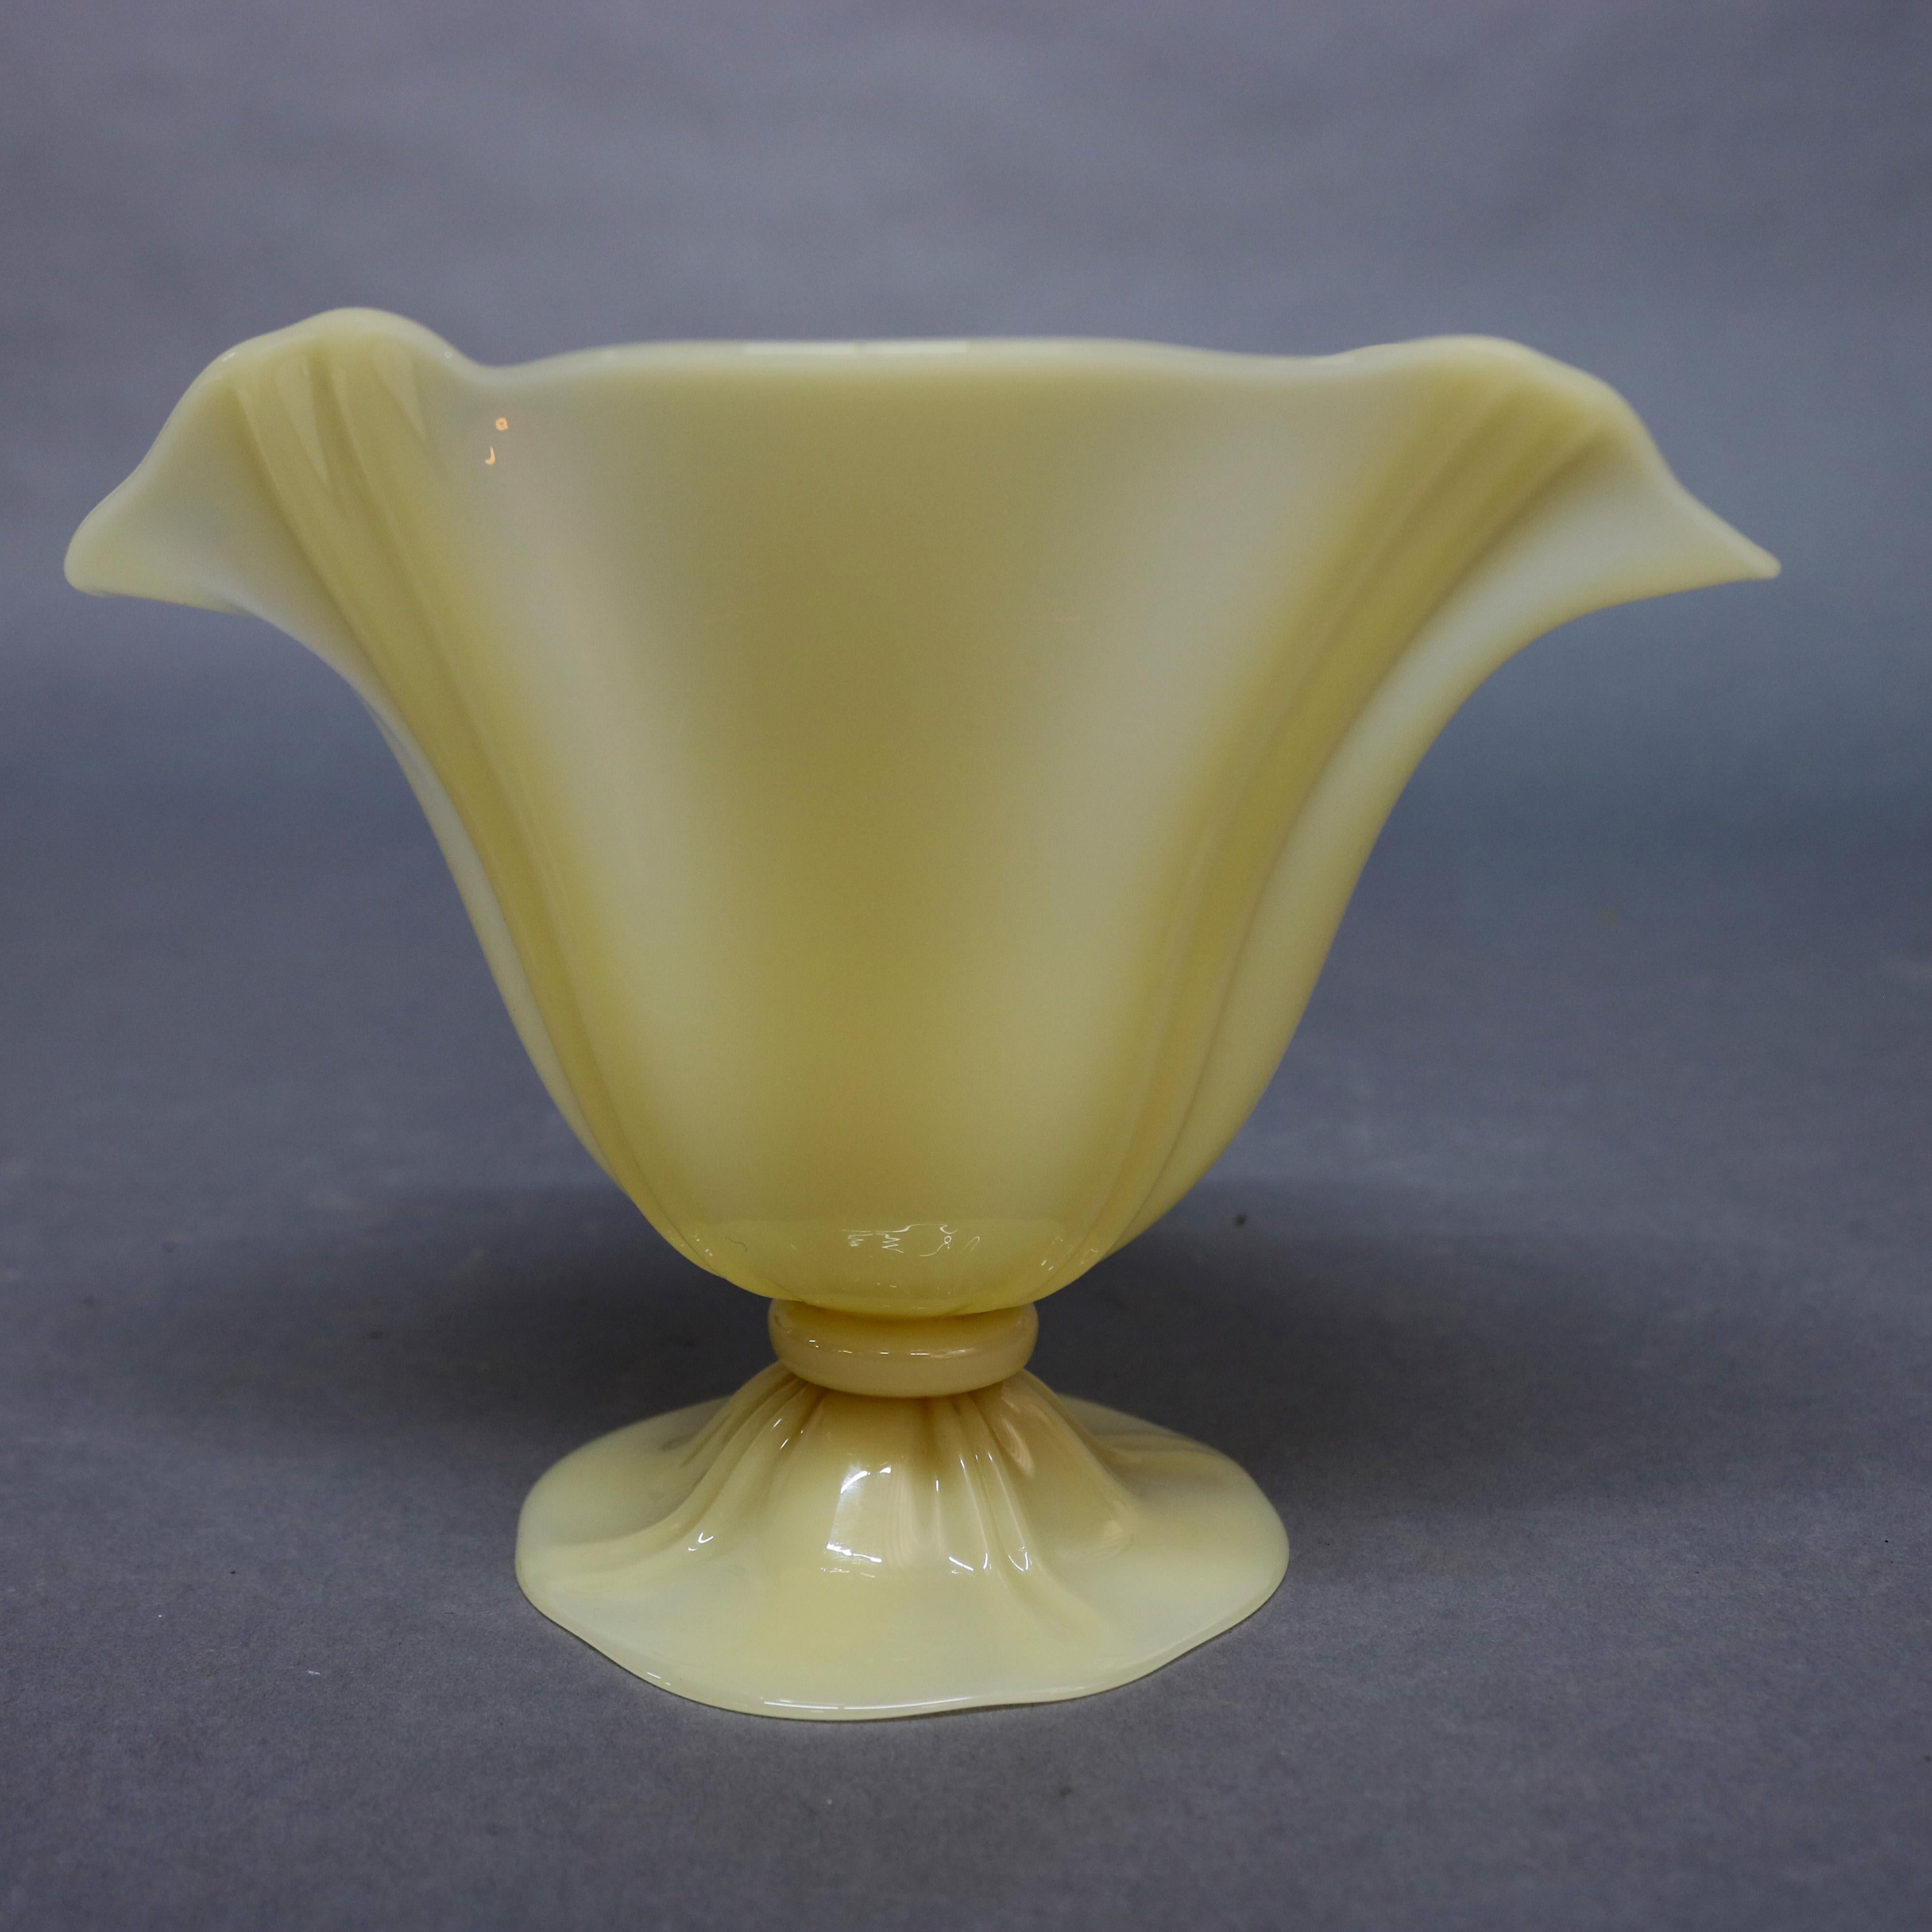 Hand-Crafted Steuben Ivorene Art Glass Ruffled and Footed Vase, circa 1930